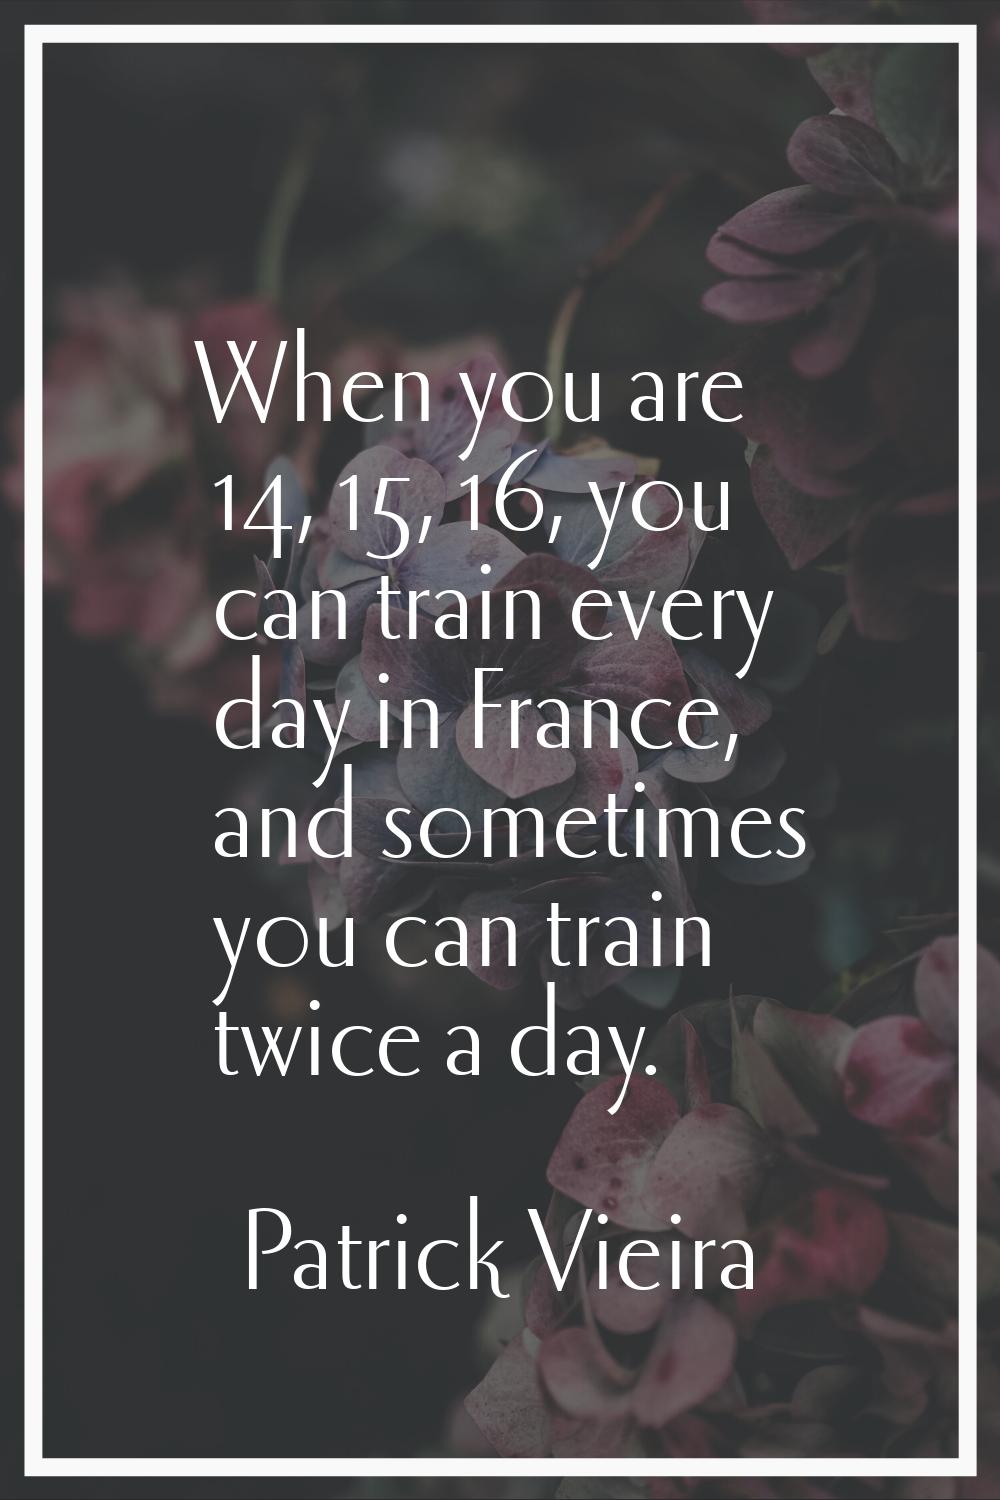 When you are 14, 15, 16, you can train every day in France, and sometimes you can train twice a day